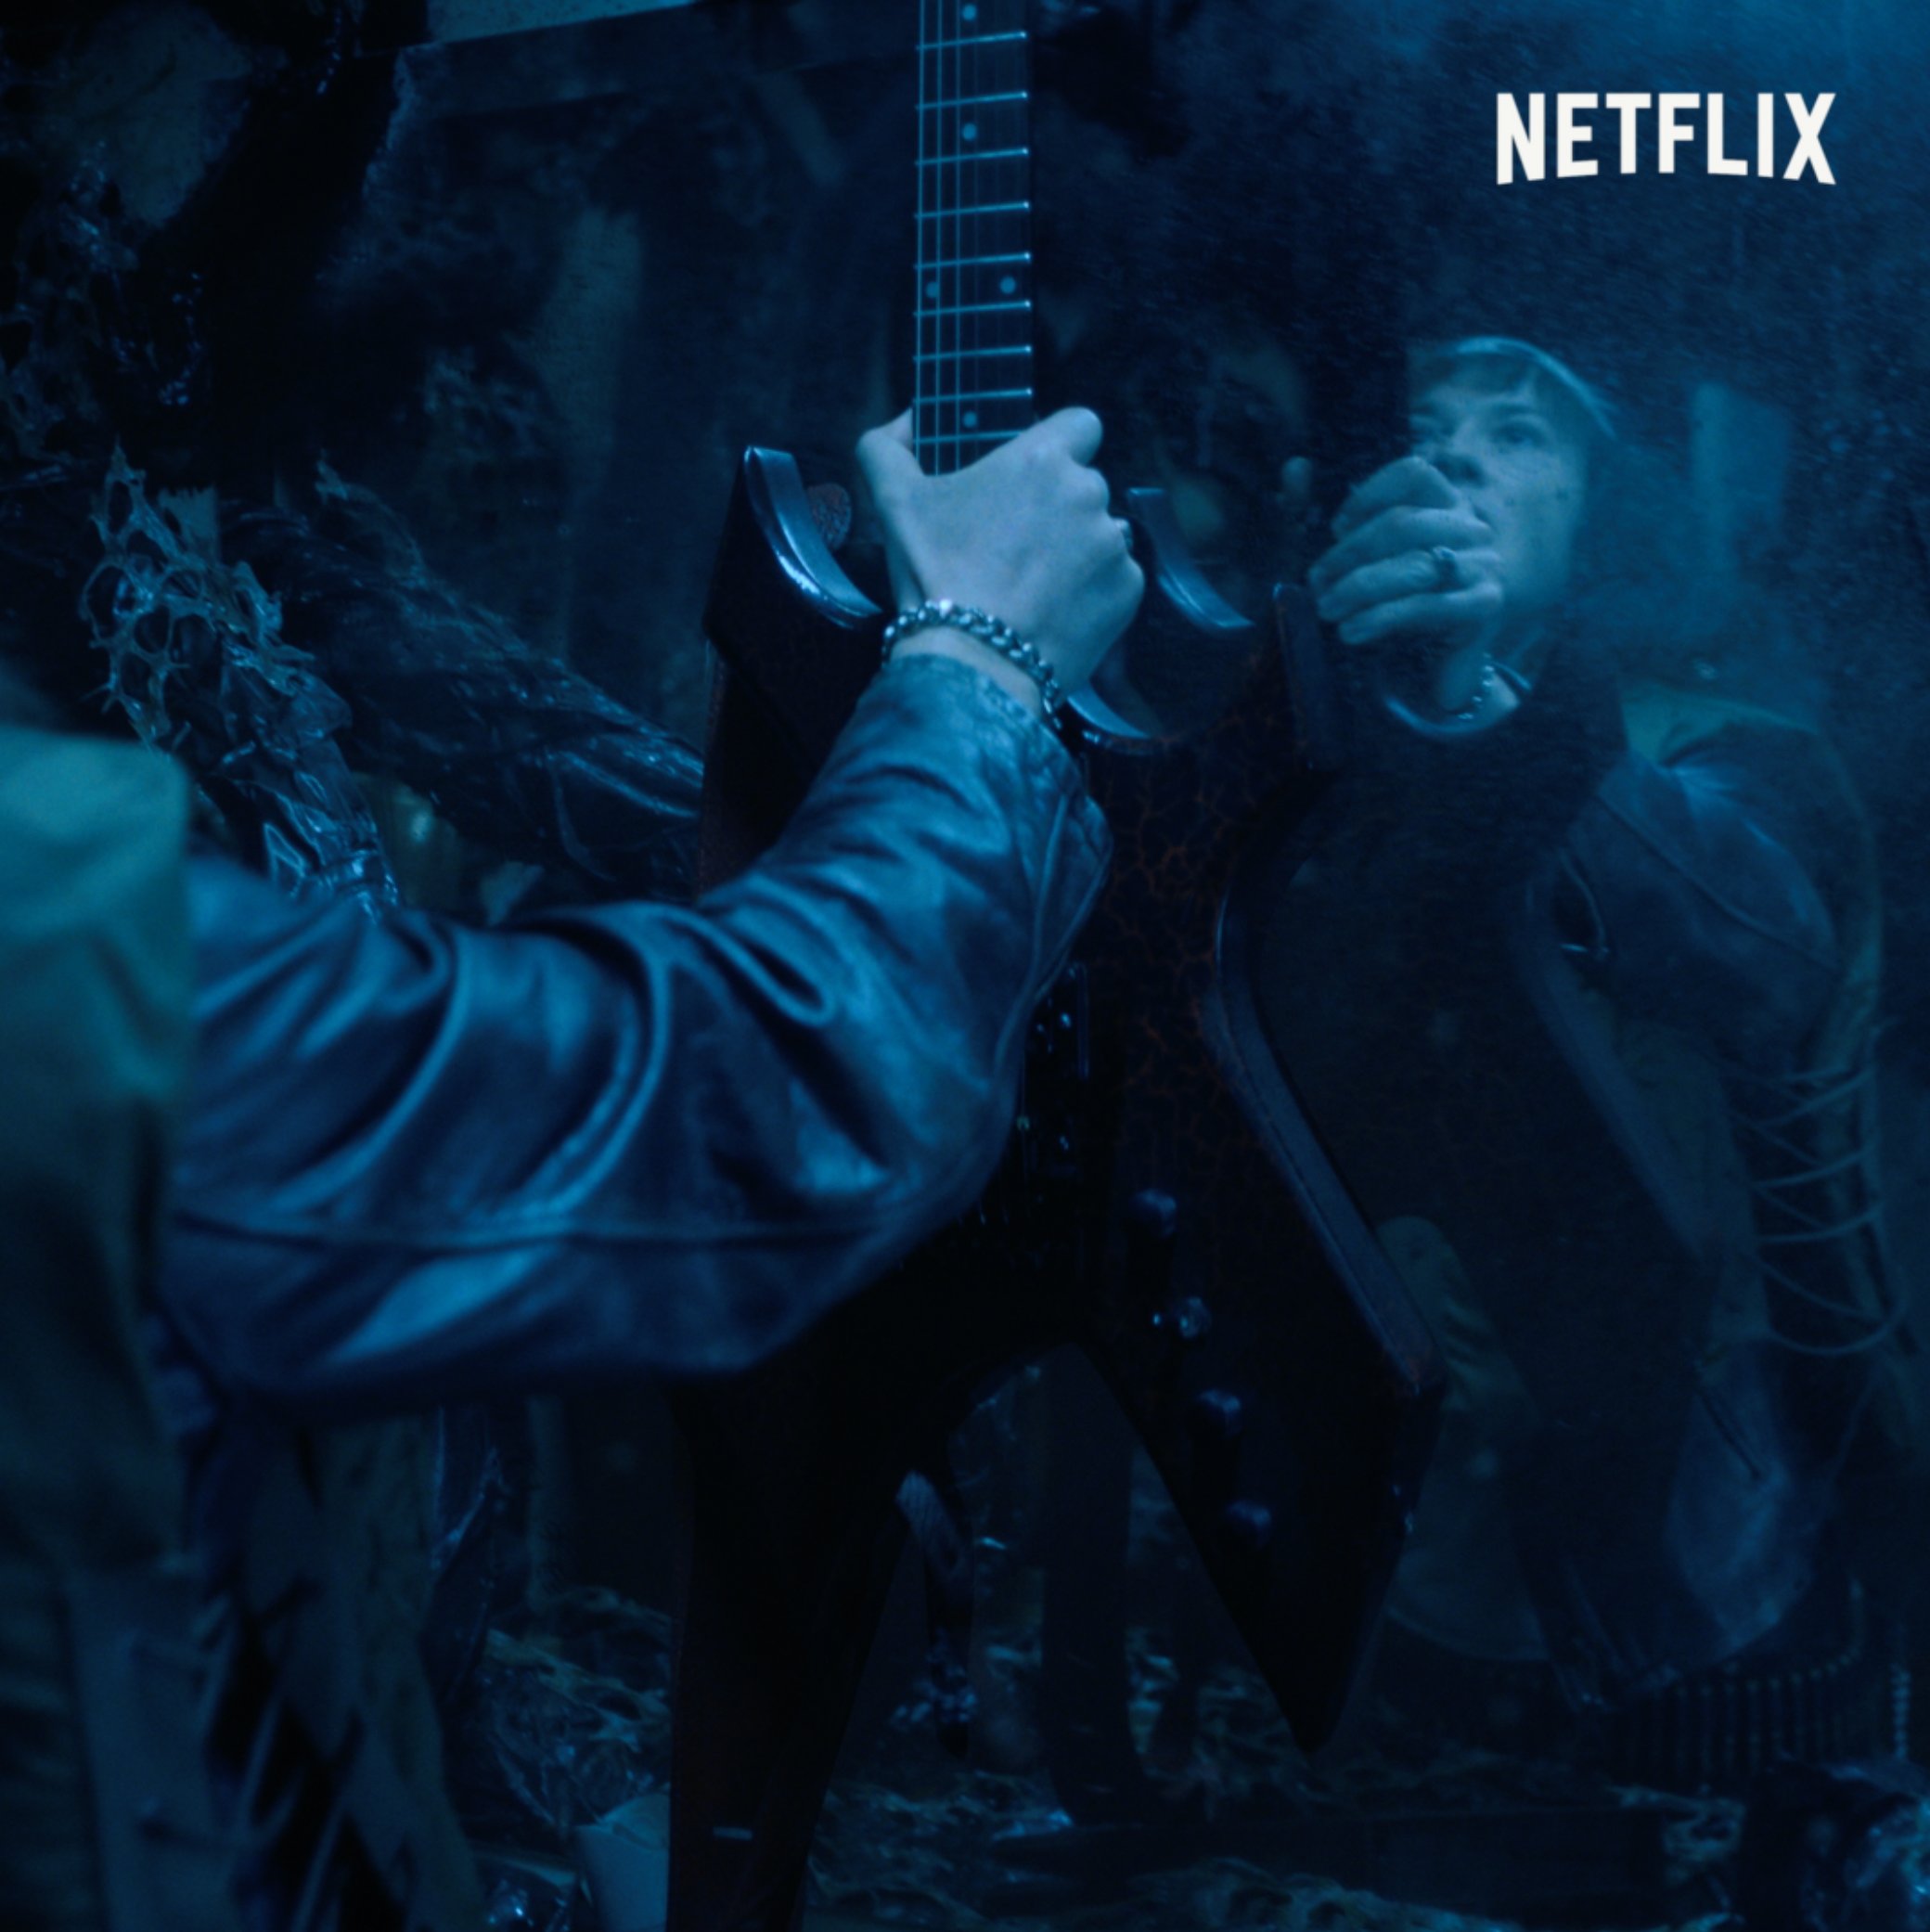 Netflix Geeked aesthetic is eddie munson playing the guitar in the upside down. #StrangerThings